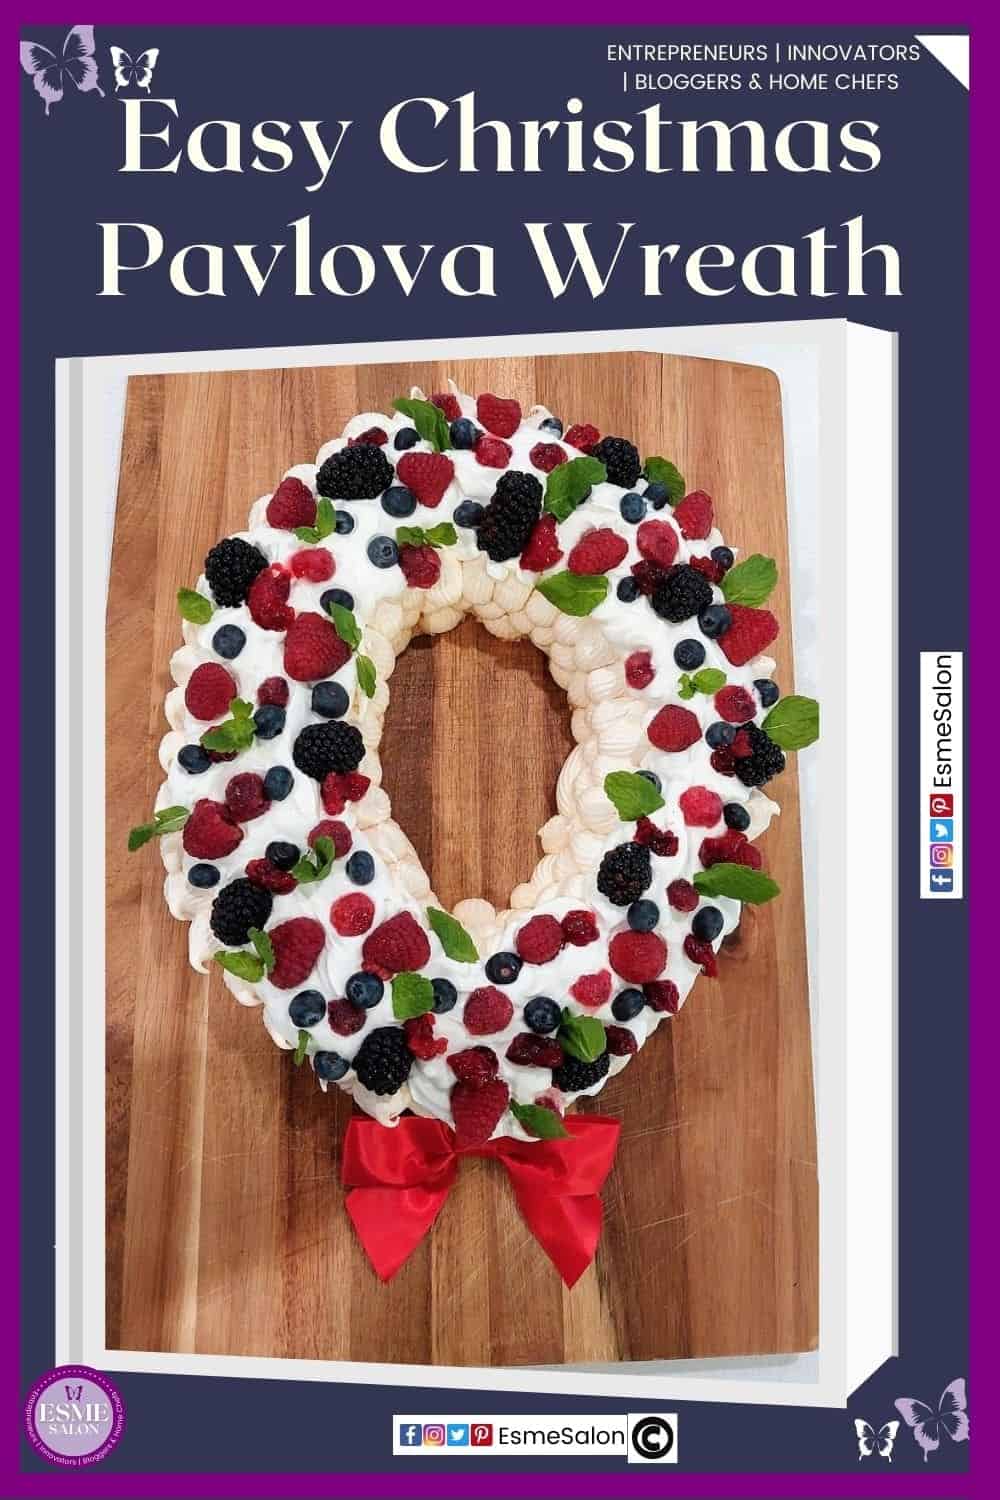 an image of a round Christmas Pavlova Wreath with lots of fruit, mint leaves and a red bow red at the bottom